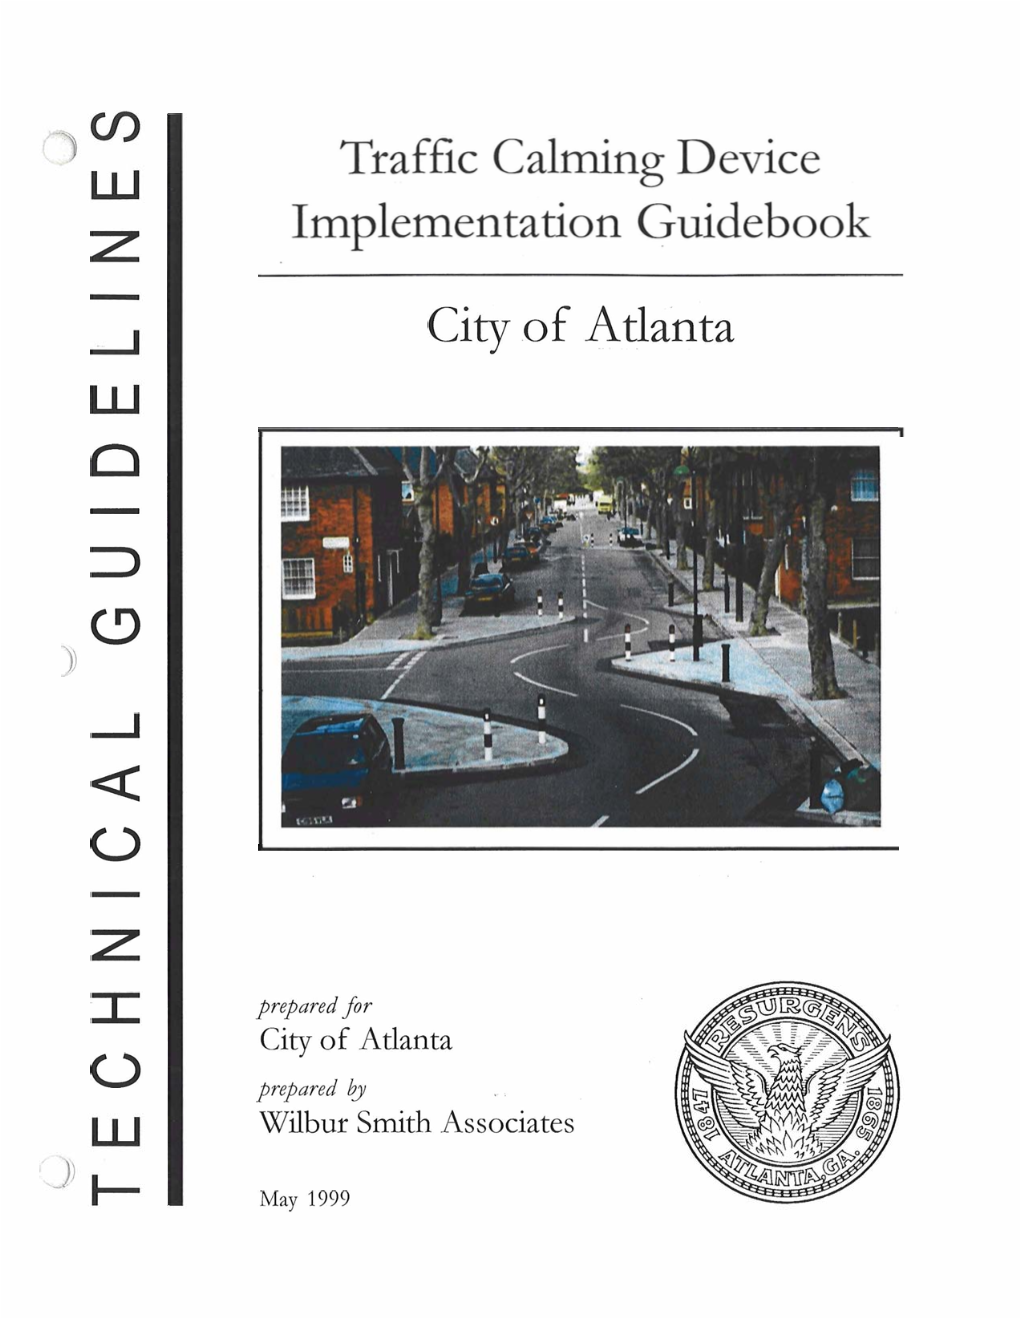 Traffic Calming Device Implementation Guidebook Analysis and Evaluation